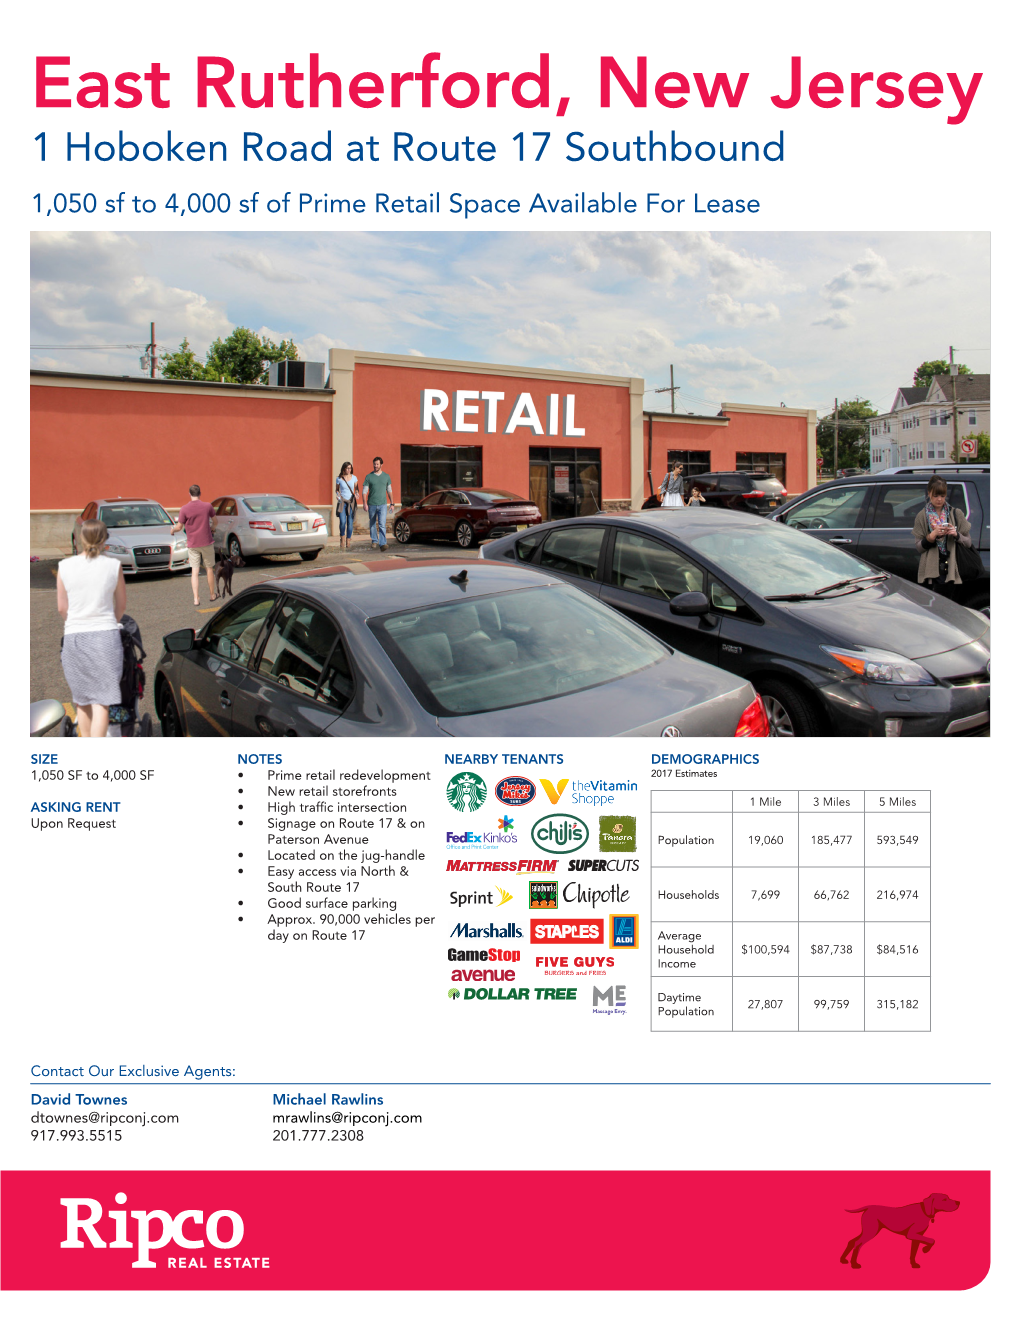 East Rutherford, New Jersey 1 Hoboken Road at Route 17 Southbound 1,050 Sf to 4,000 Sf of Prime Retail Space Available for Lease